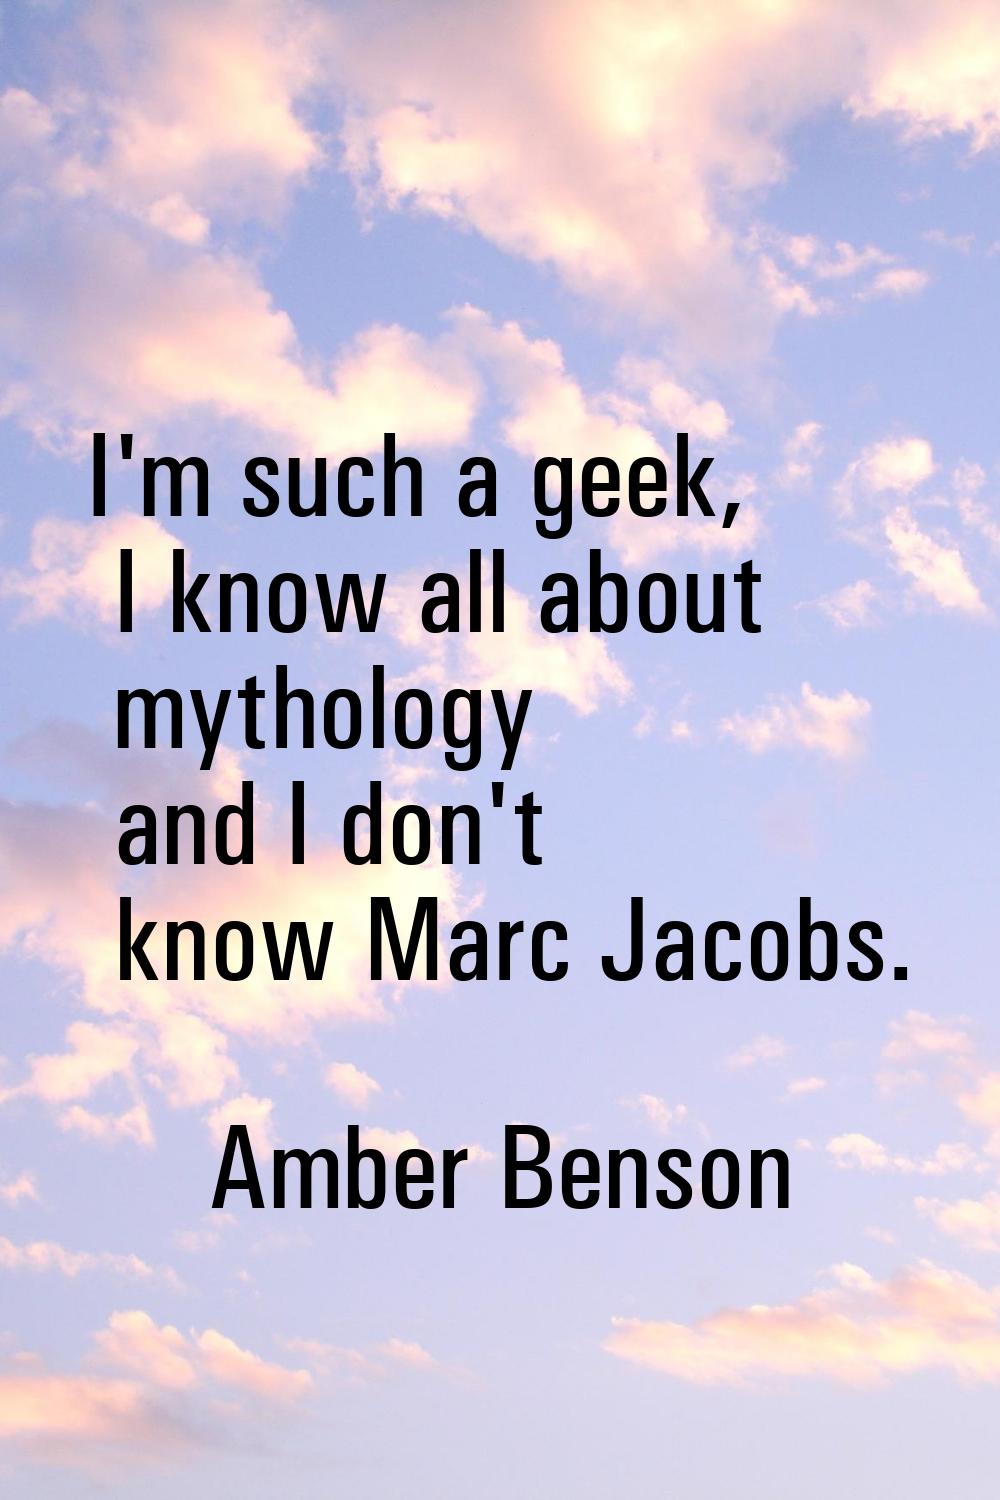 I'm such a geek, I know all about mythology and I don't know Marc Jacobs.